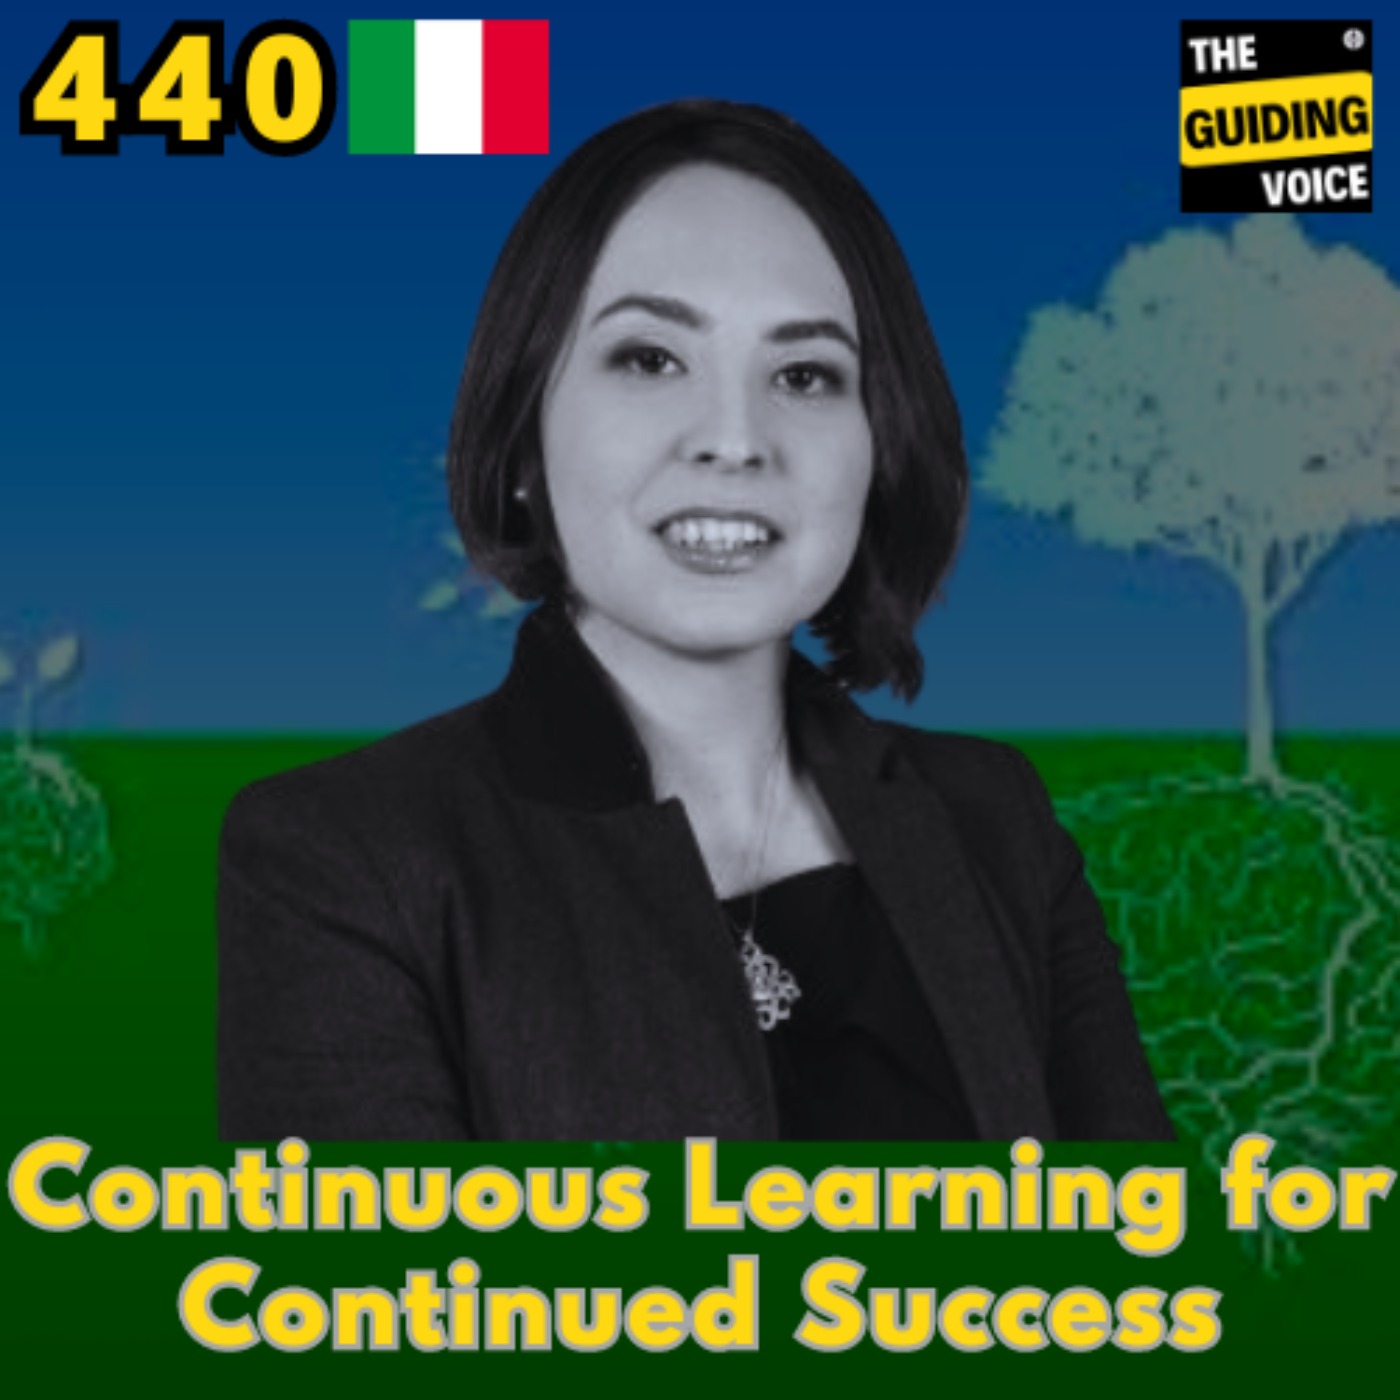 Continuous Learning for personal empowerment & continued success | Valentina Lorenzon | #TGVGlobalSpeakerFestival | #TGV440